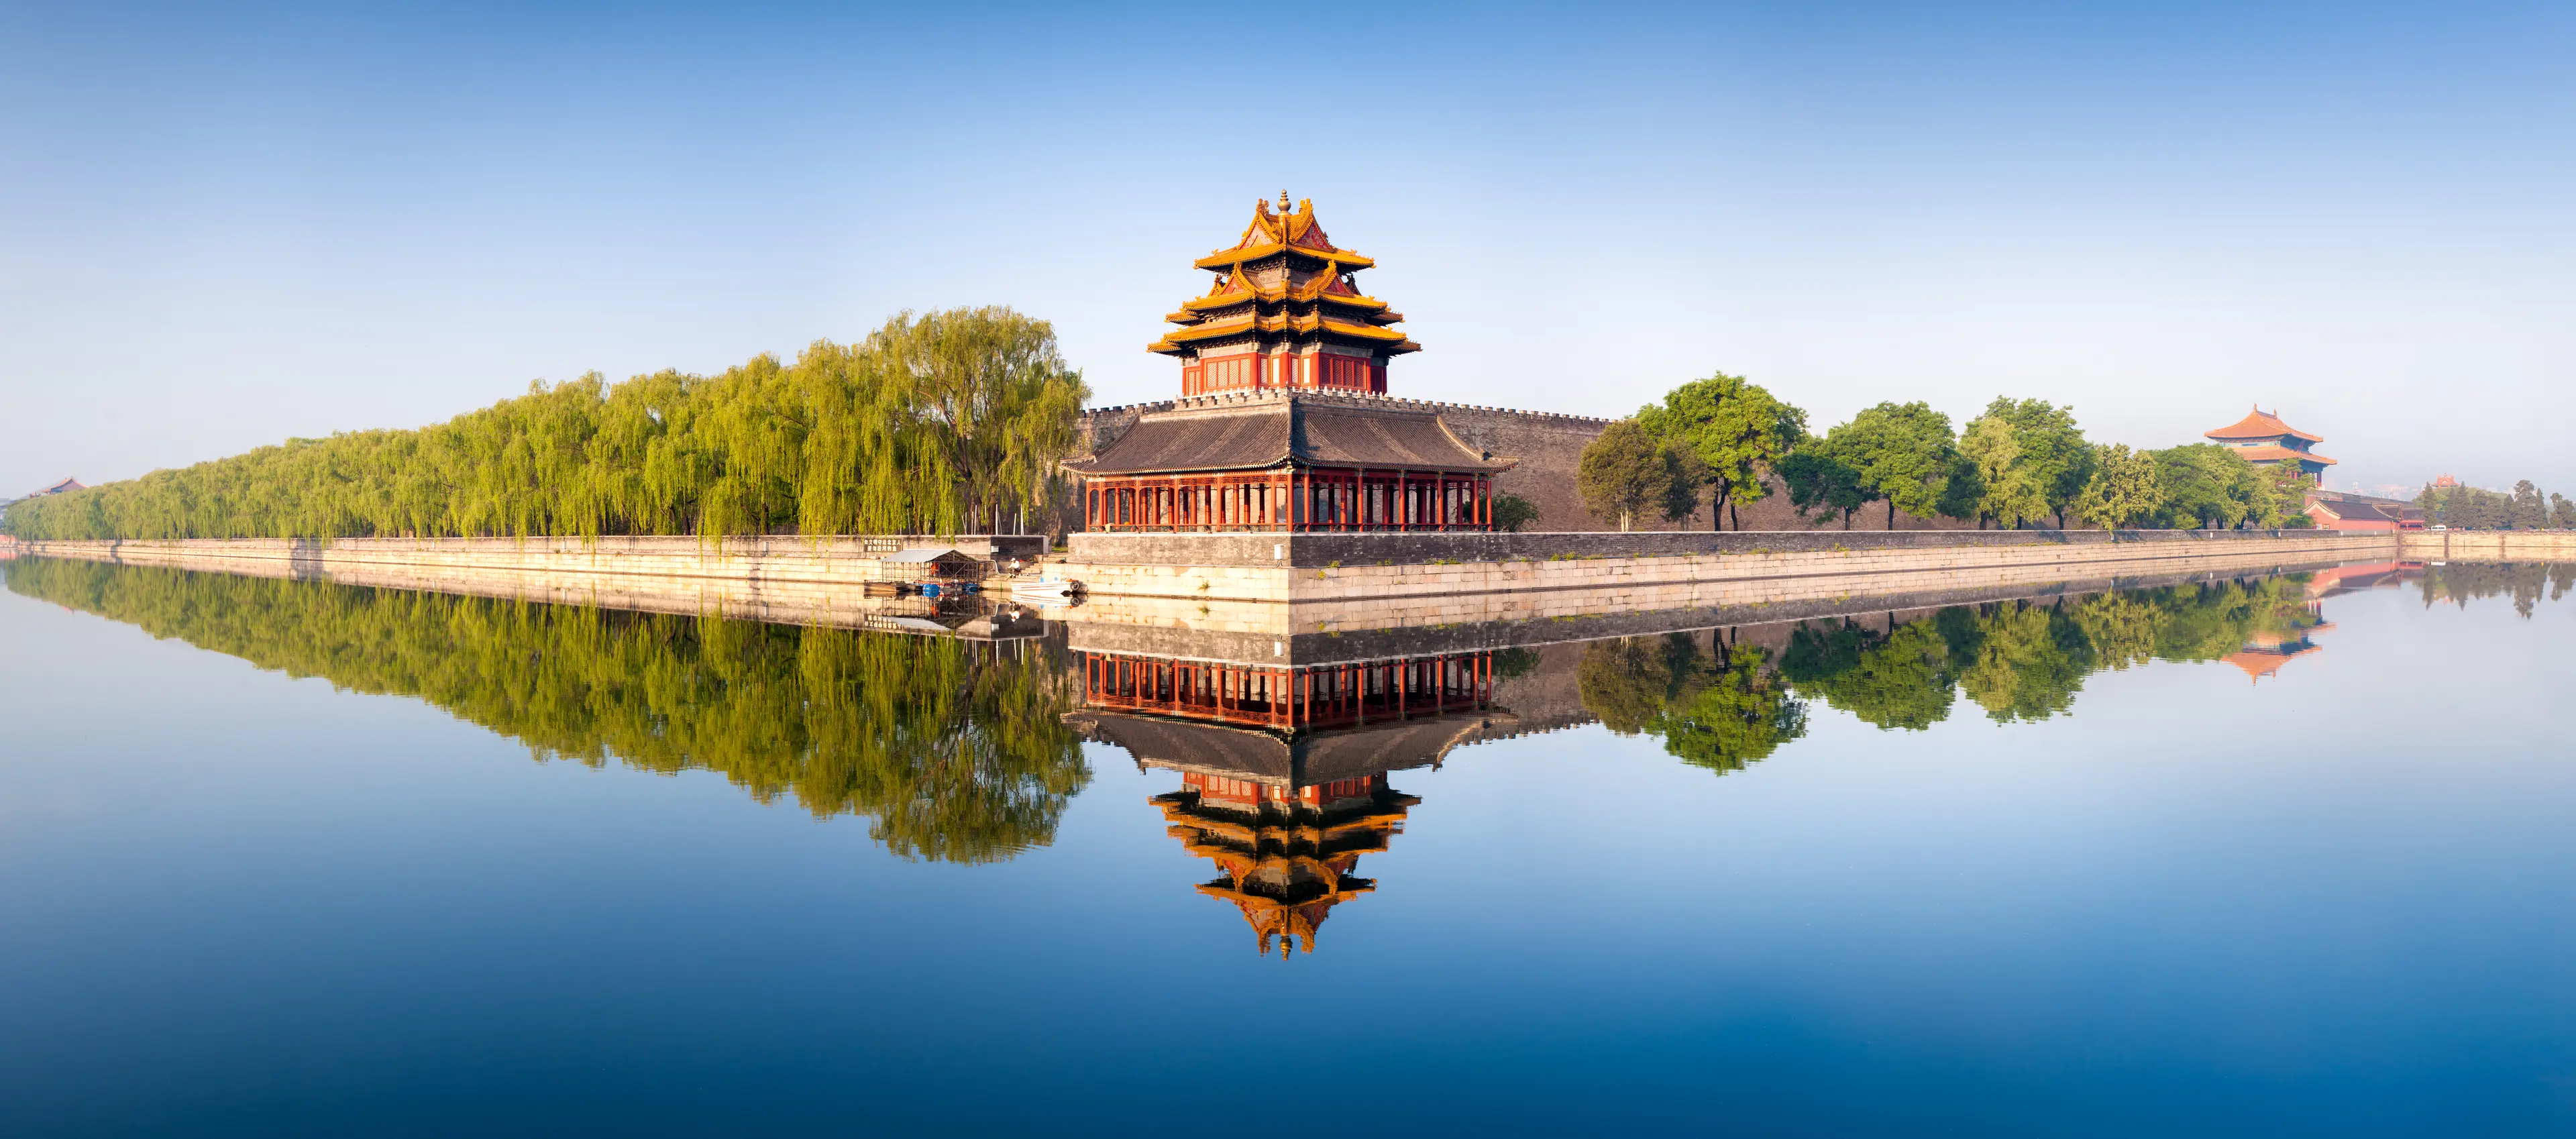 3-Day Adventure Itinerary for Beijing, China